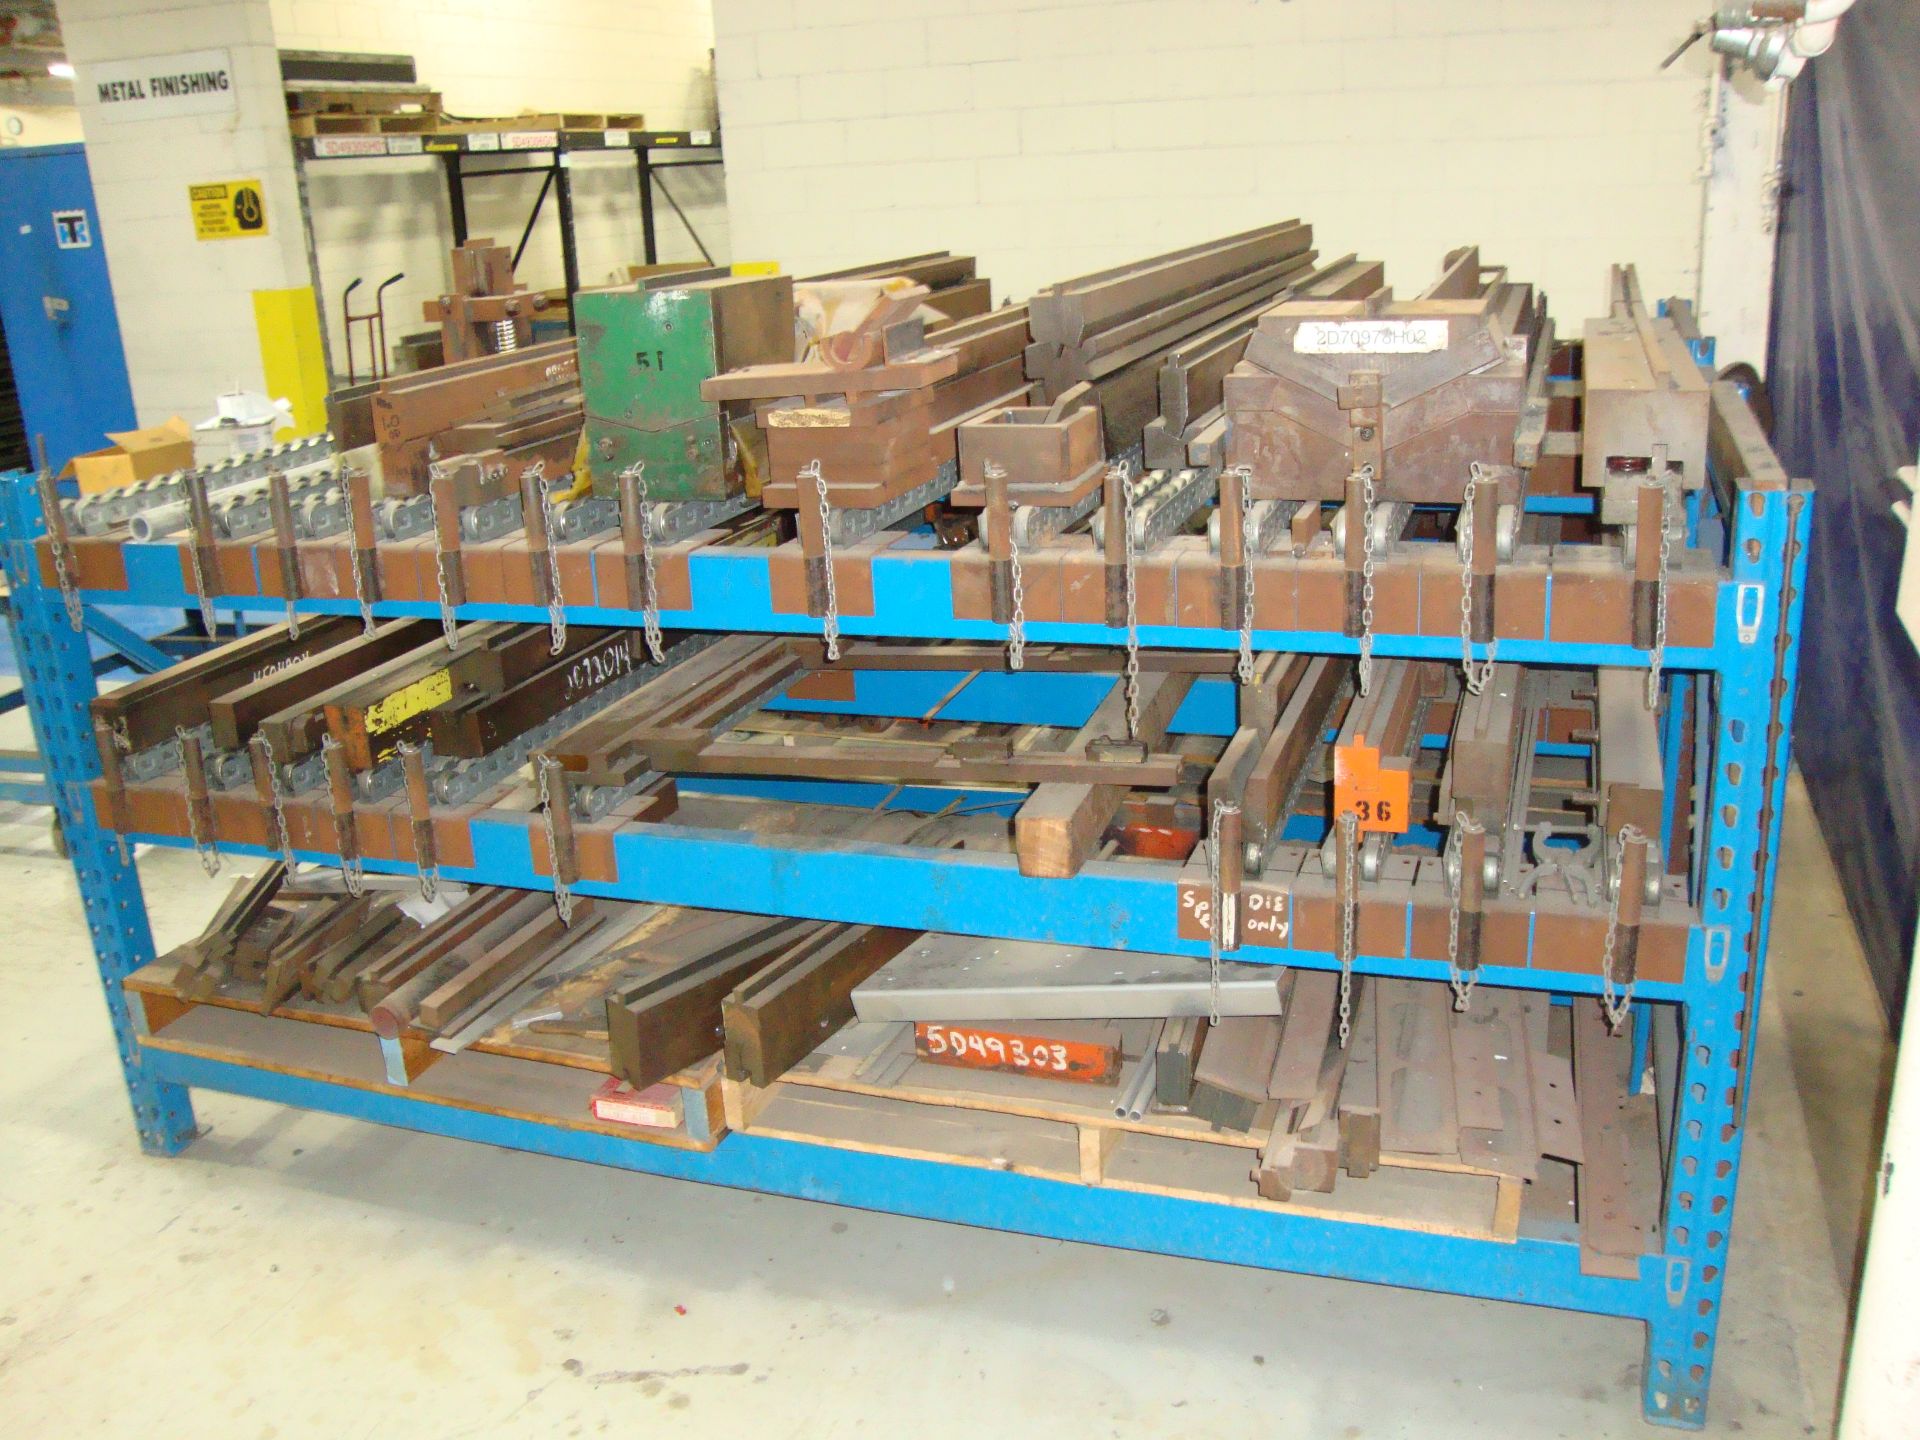 Press Brake Rolling Tooling Rack ONLY, approx. 103" x 96" x 48" tall - Image 5 of 5